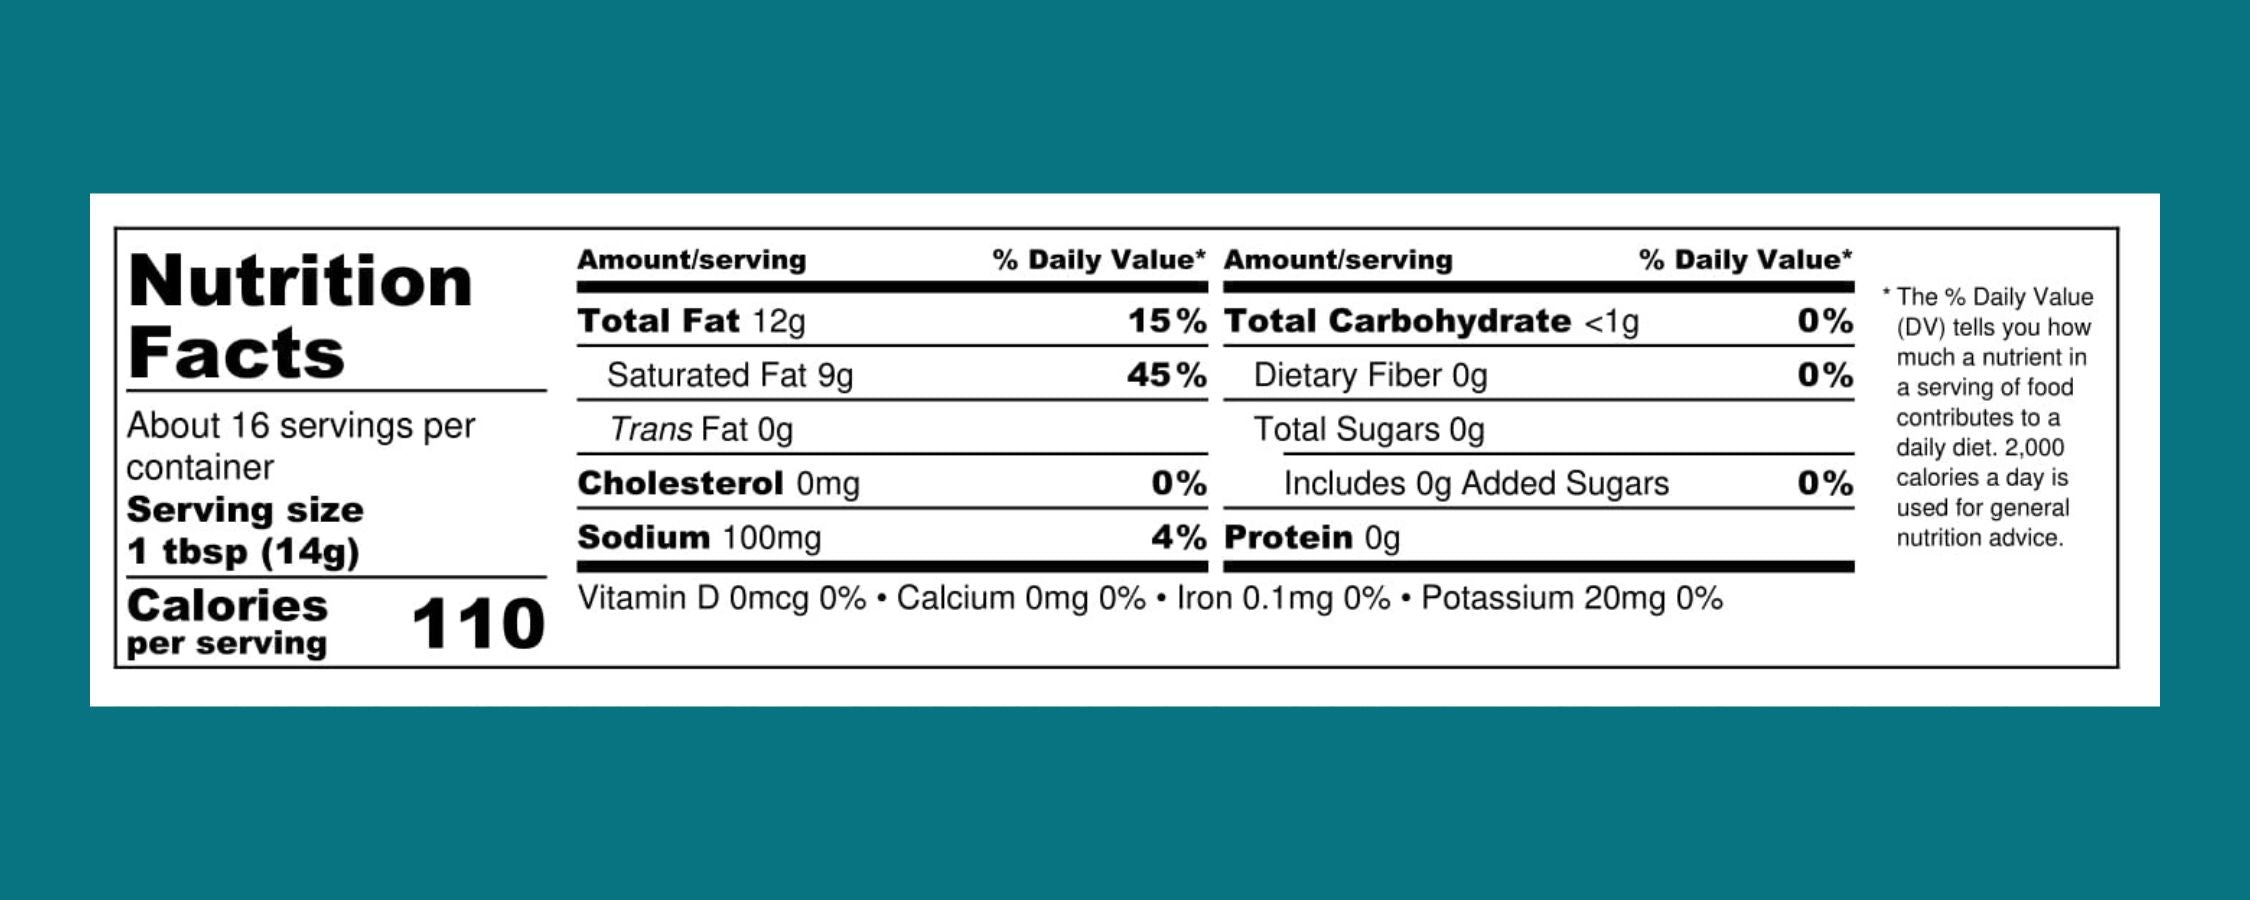 Salted Original Cashew Vegan Butter Nutrition Facts Turquoise Background